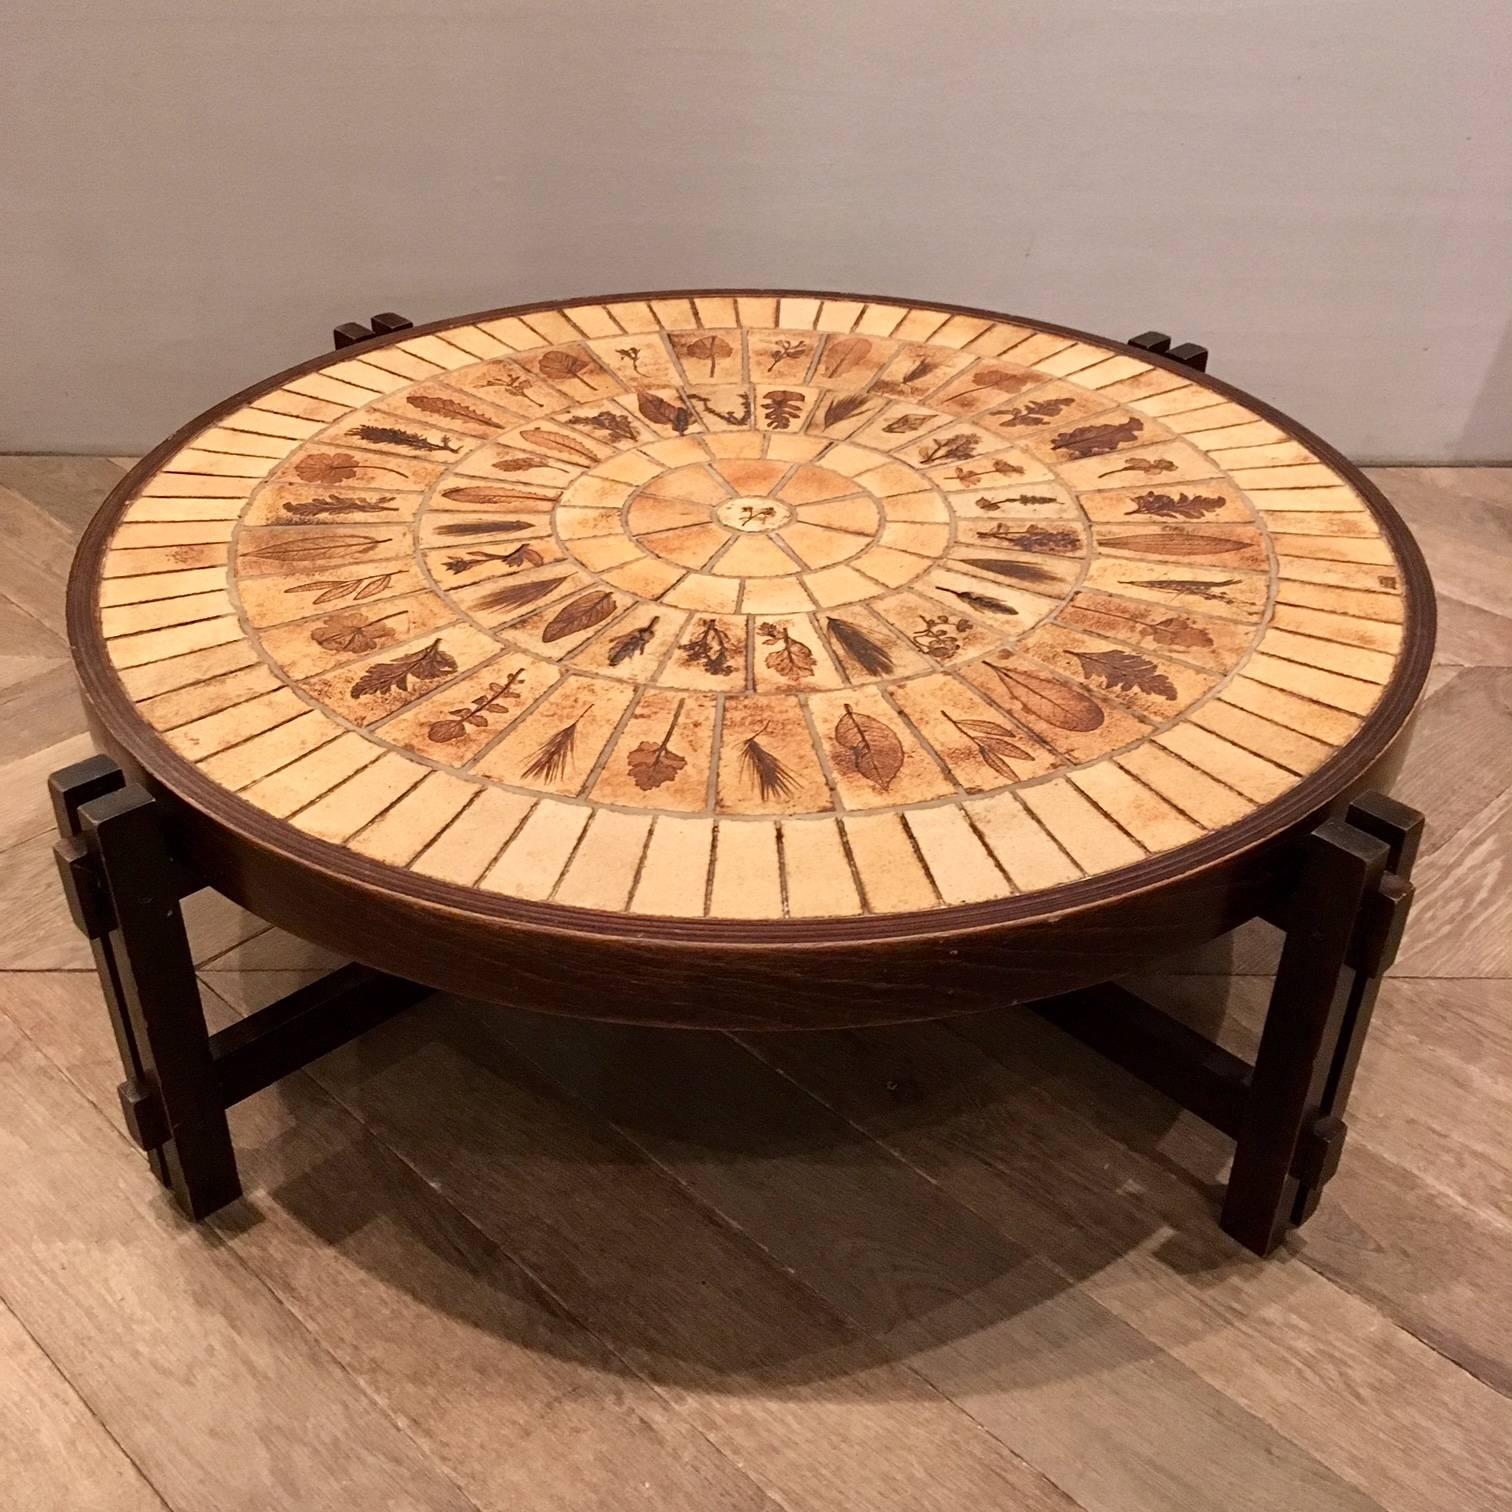 Beautiful coffee table by Roger Capron (1922-2006) made in the 1970s. 
Capron used leafs which he pressed in the clay of the tiles before baking. The table has jointed wooden legs supported by an 